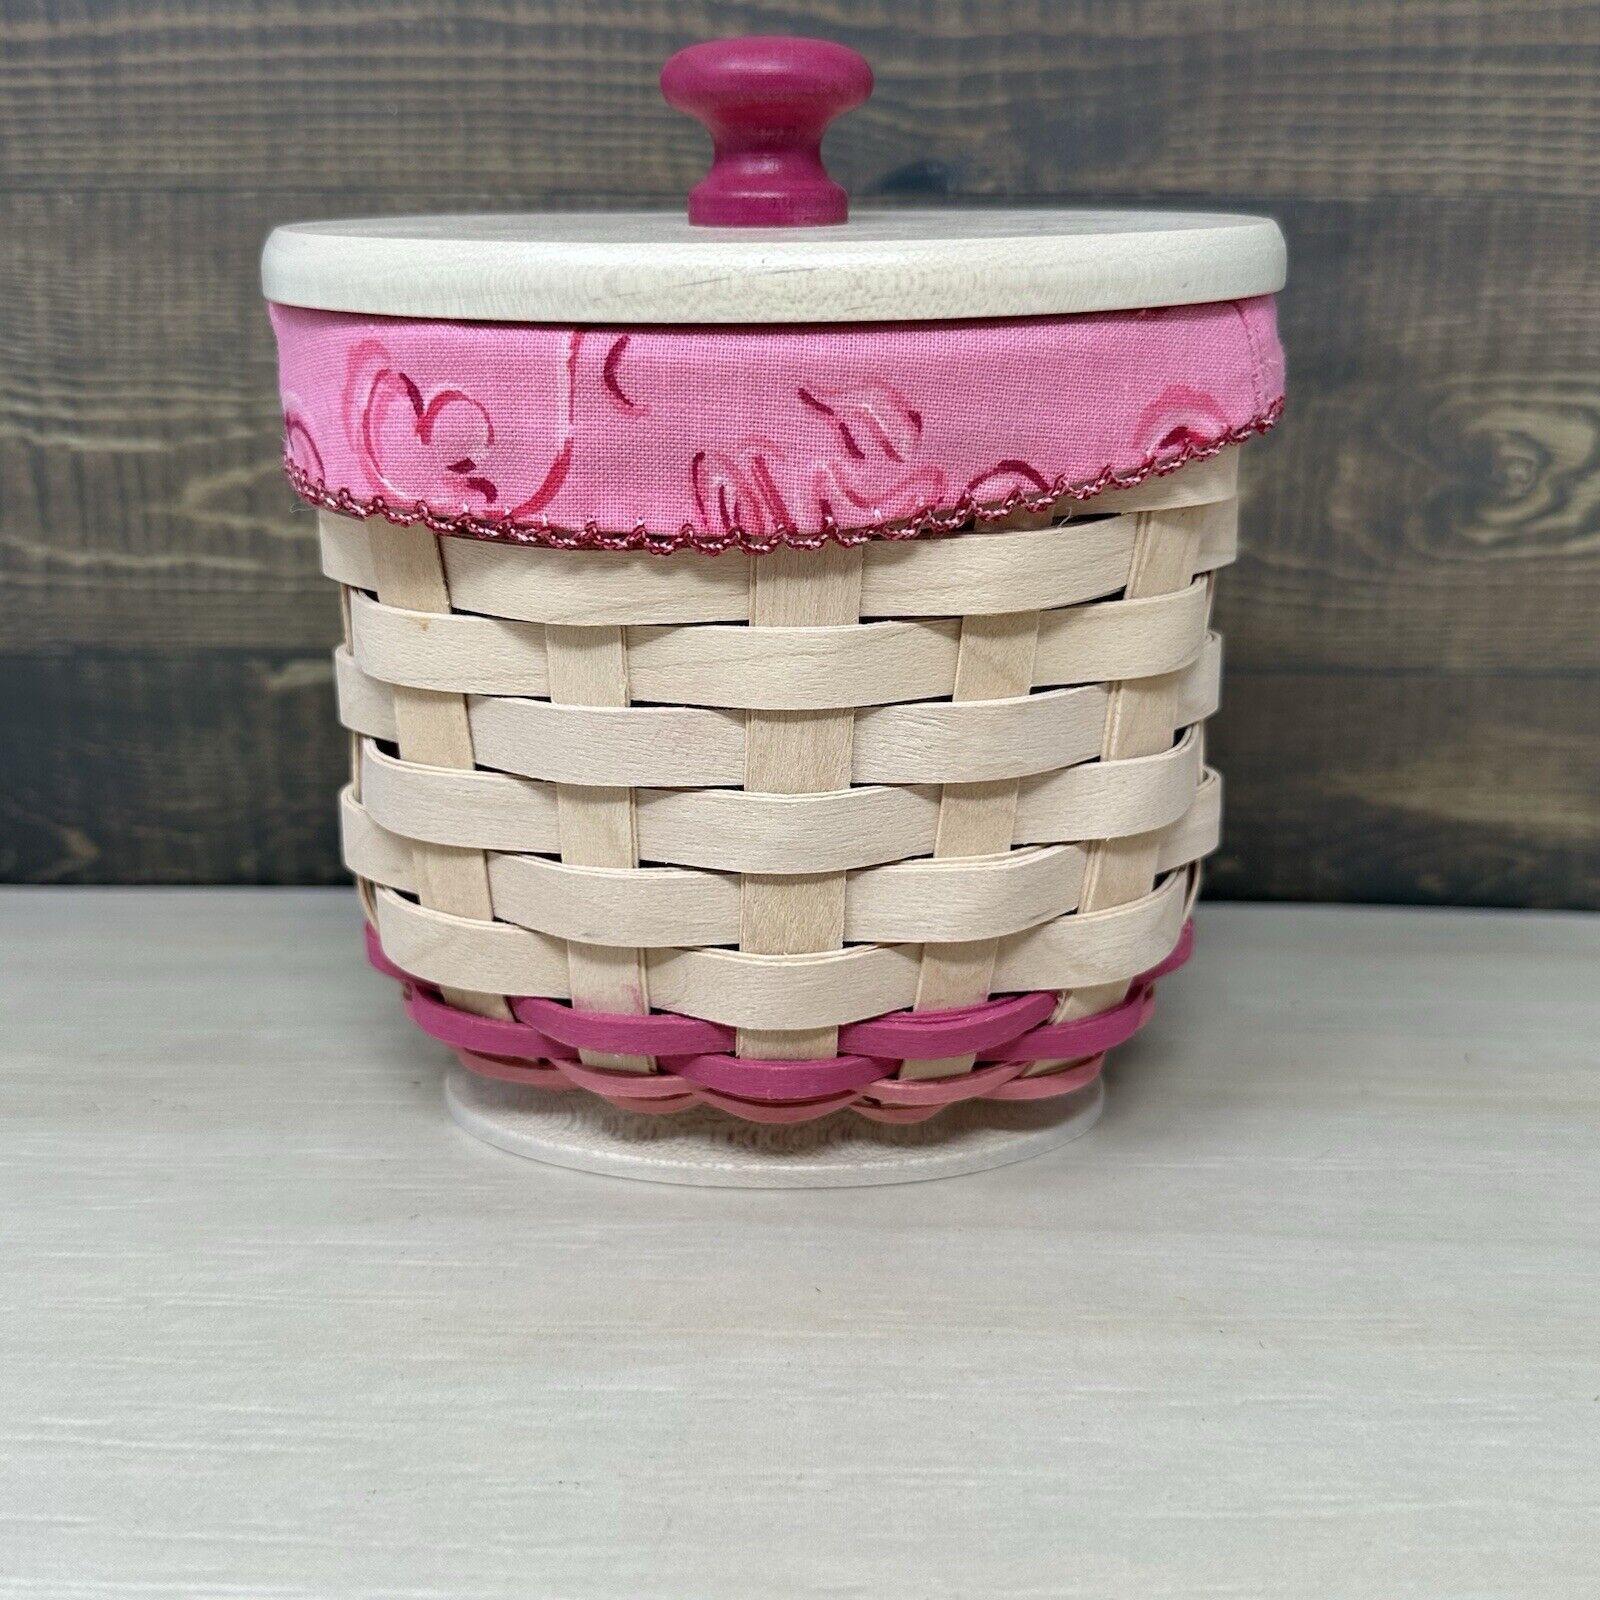 Longaberger 2011 Horizon of Hope Basket With Lid Protector Liner and Tags